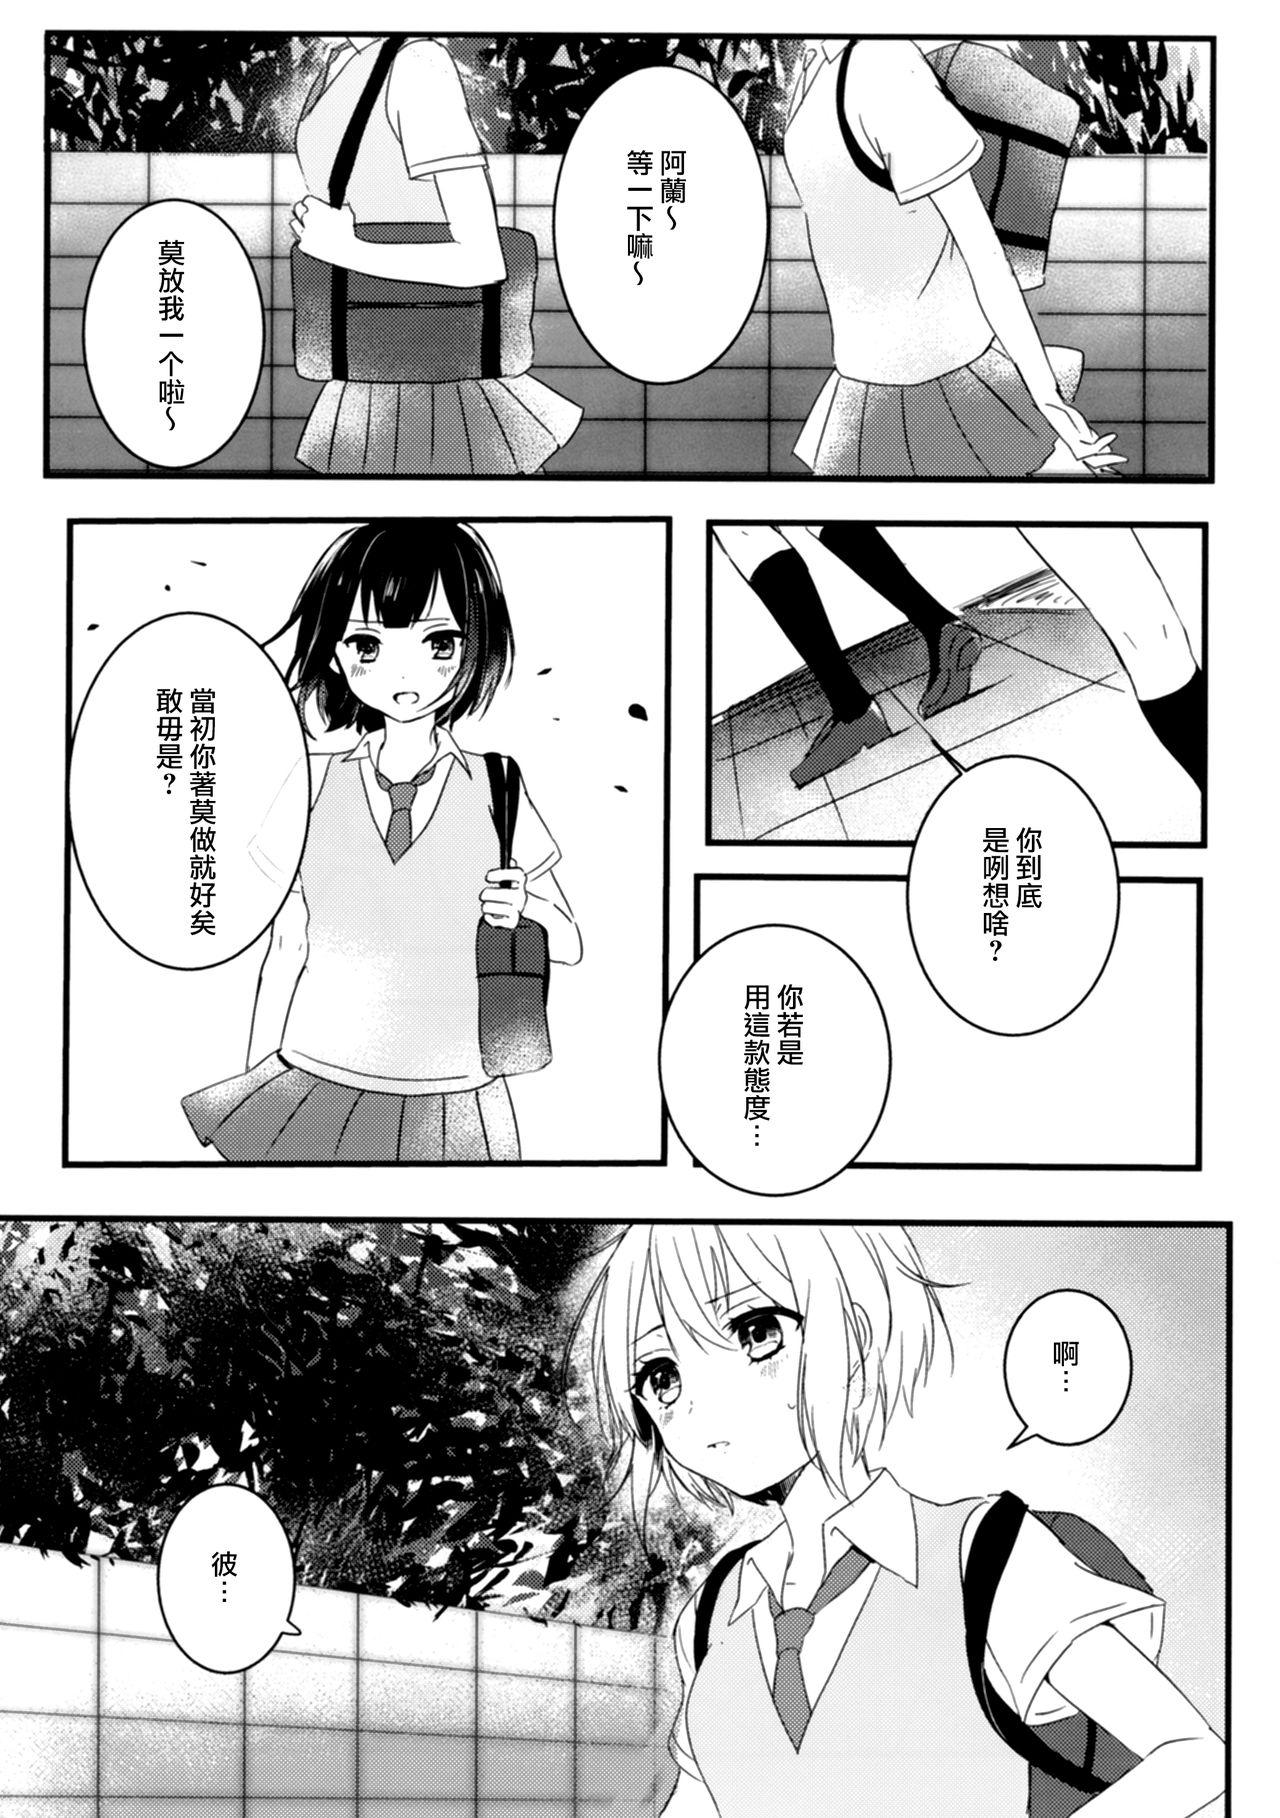 Perra Secret relationship - Bang dream Pussy Licking - Page 12